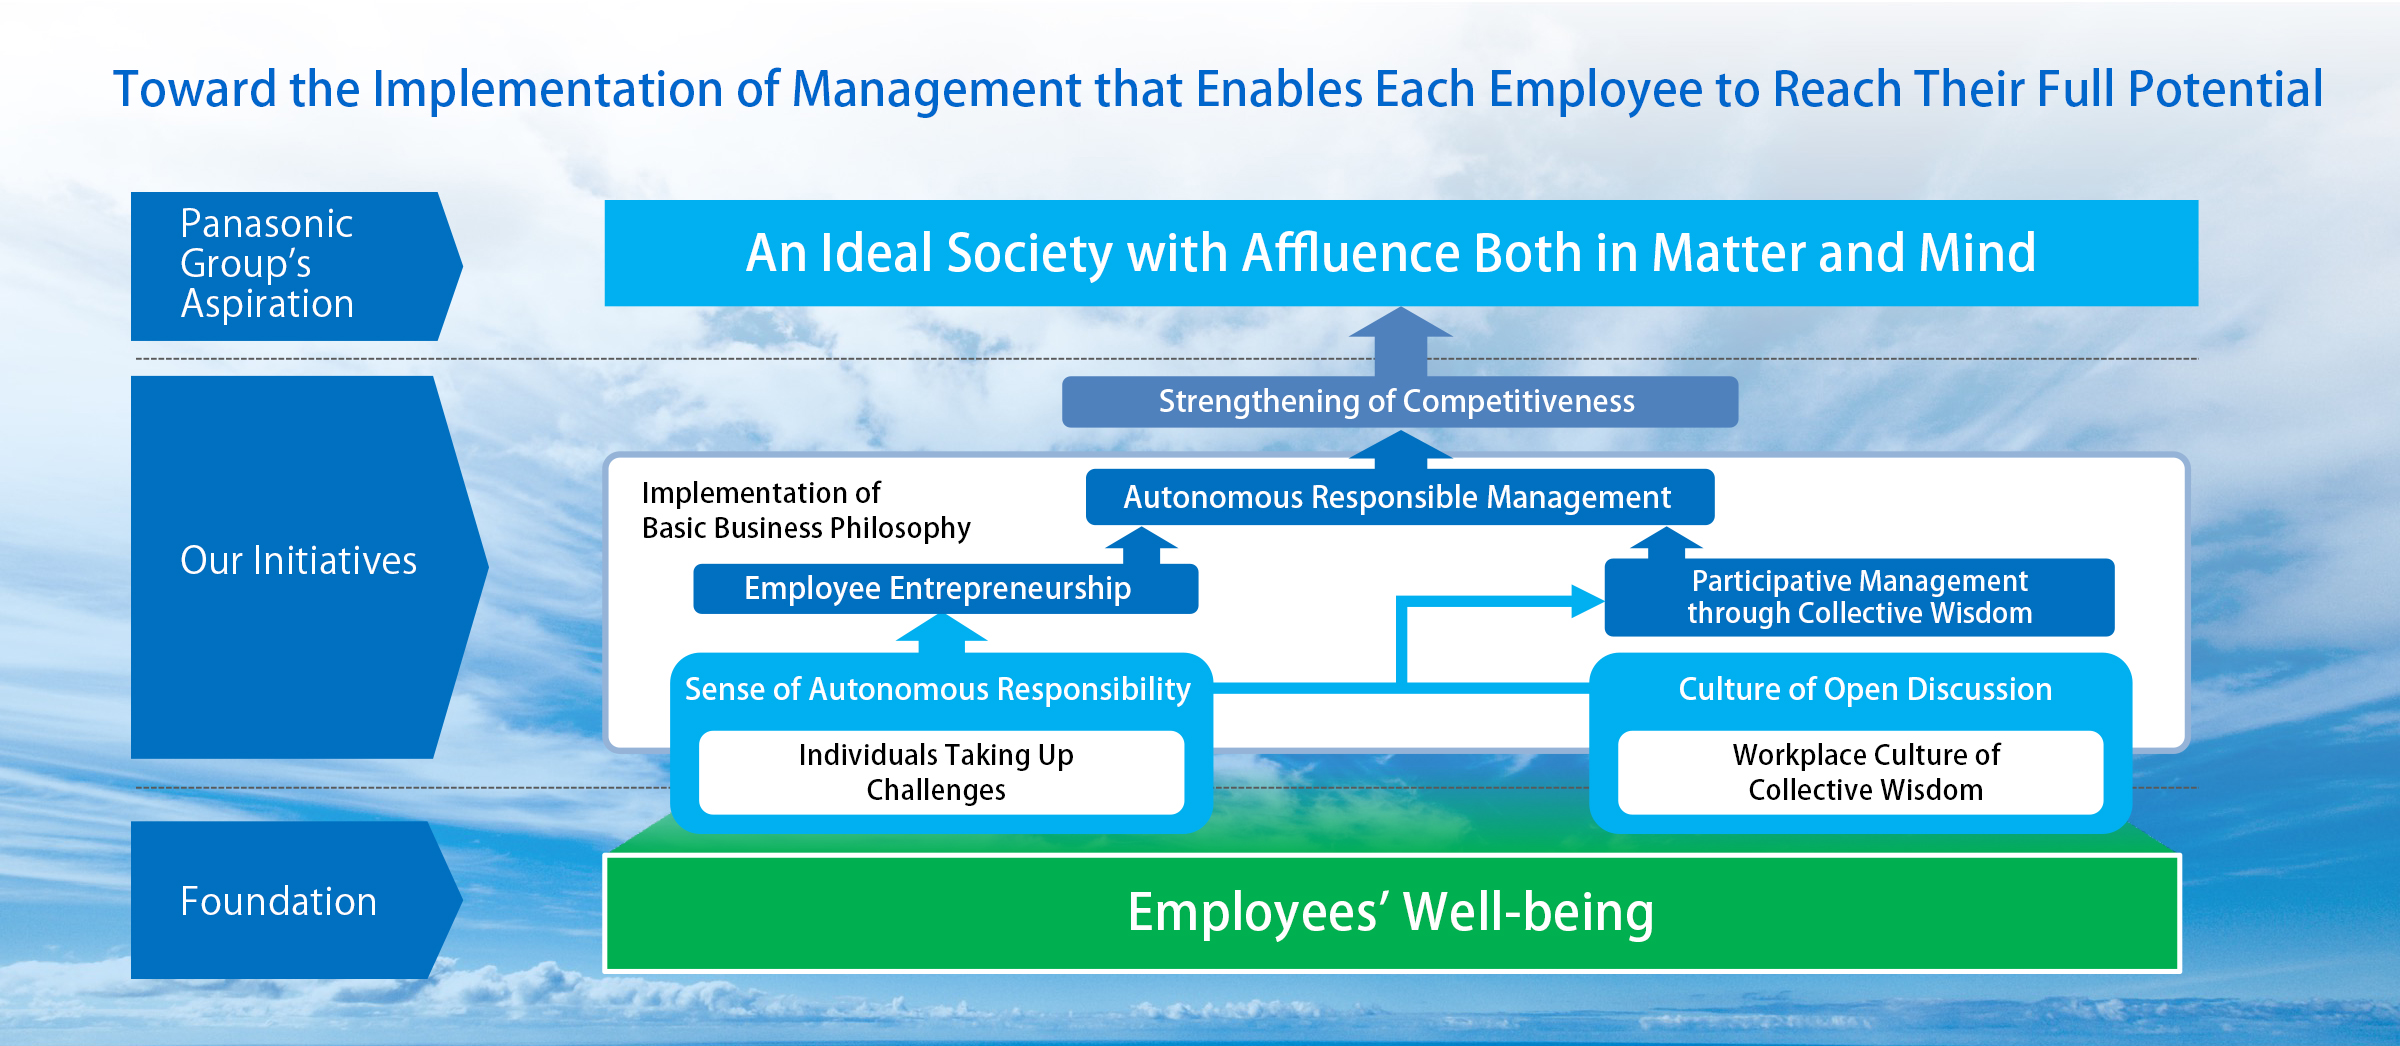 Image: Diagram showing that employees’ well-being is a prerequisite for the Panasonic Group’s goal of an ideal society with affluence both in matter and mind and the means to realize this goal